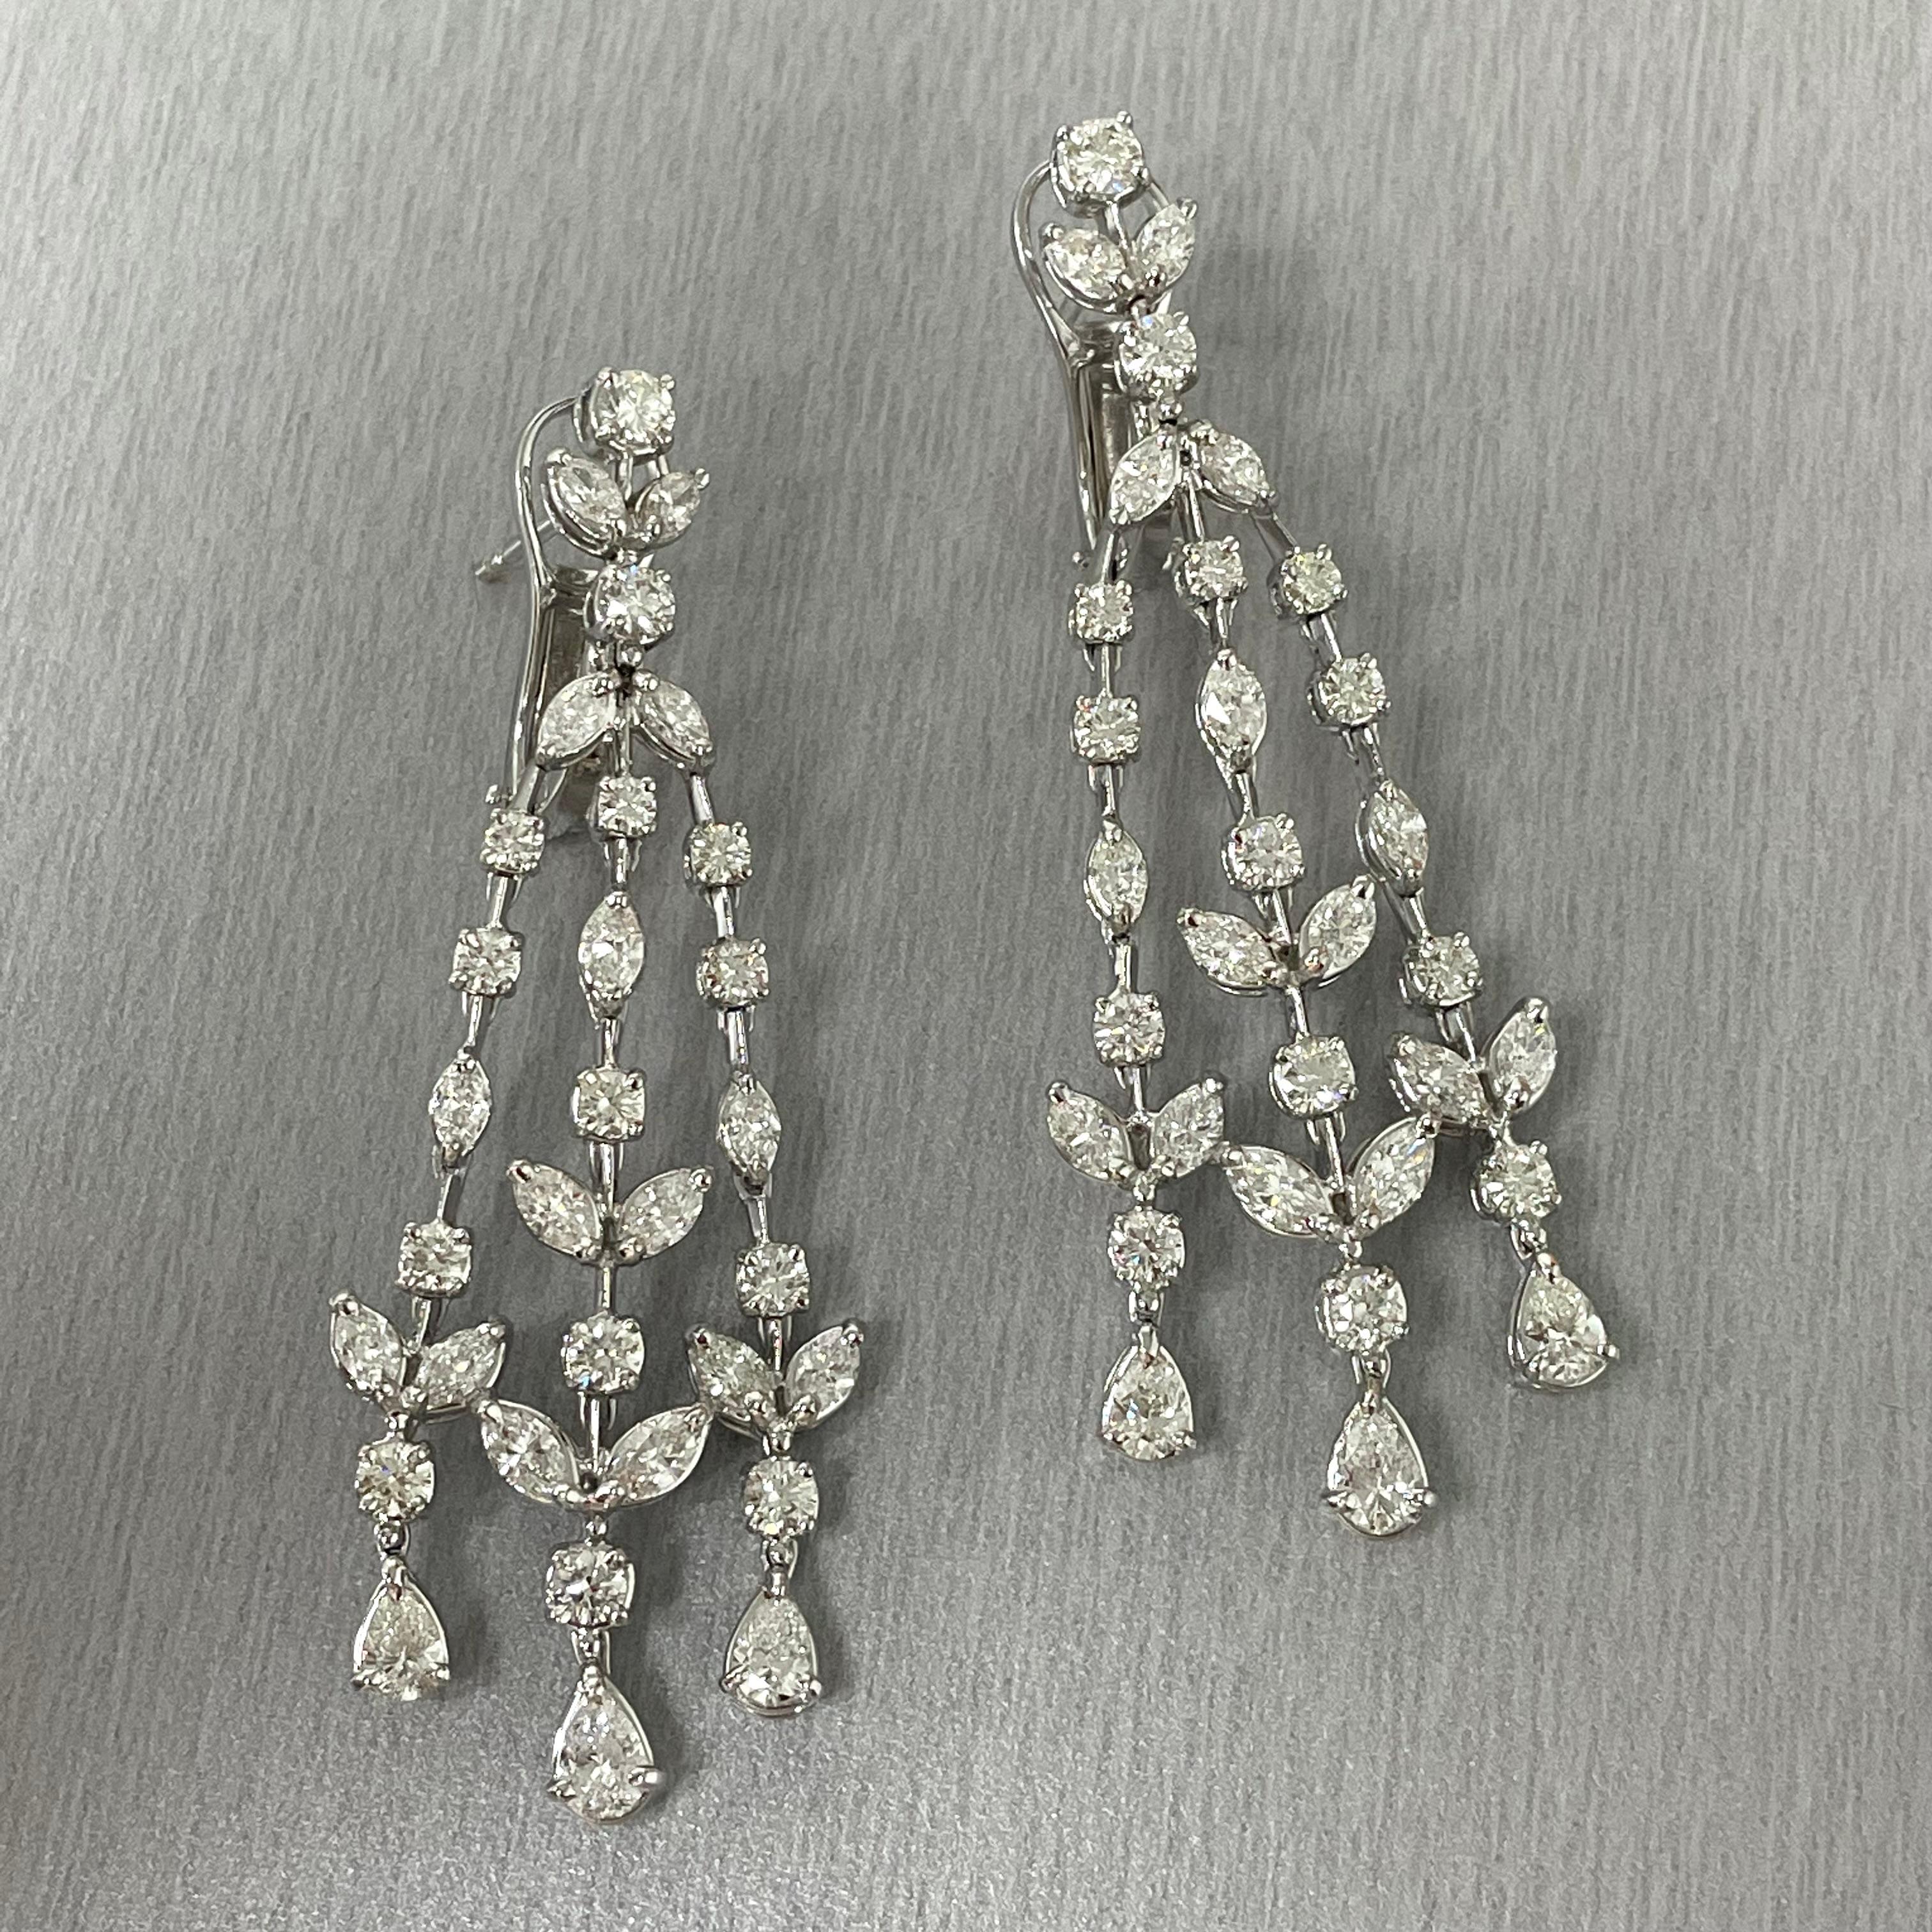 The Beauvince Garden of Eden Earrings feature a timeless design befitting a princess. They are modern, classic, royal & elegant. 

Diamonds Shapes: Pear Shape, Marquise & Round 
Total Diamonds Weight: 7.71 ct 
Diamonds Color: F - H 
Diamonds